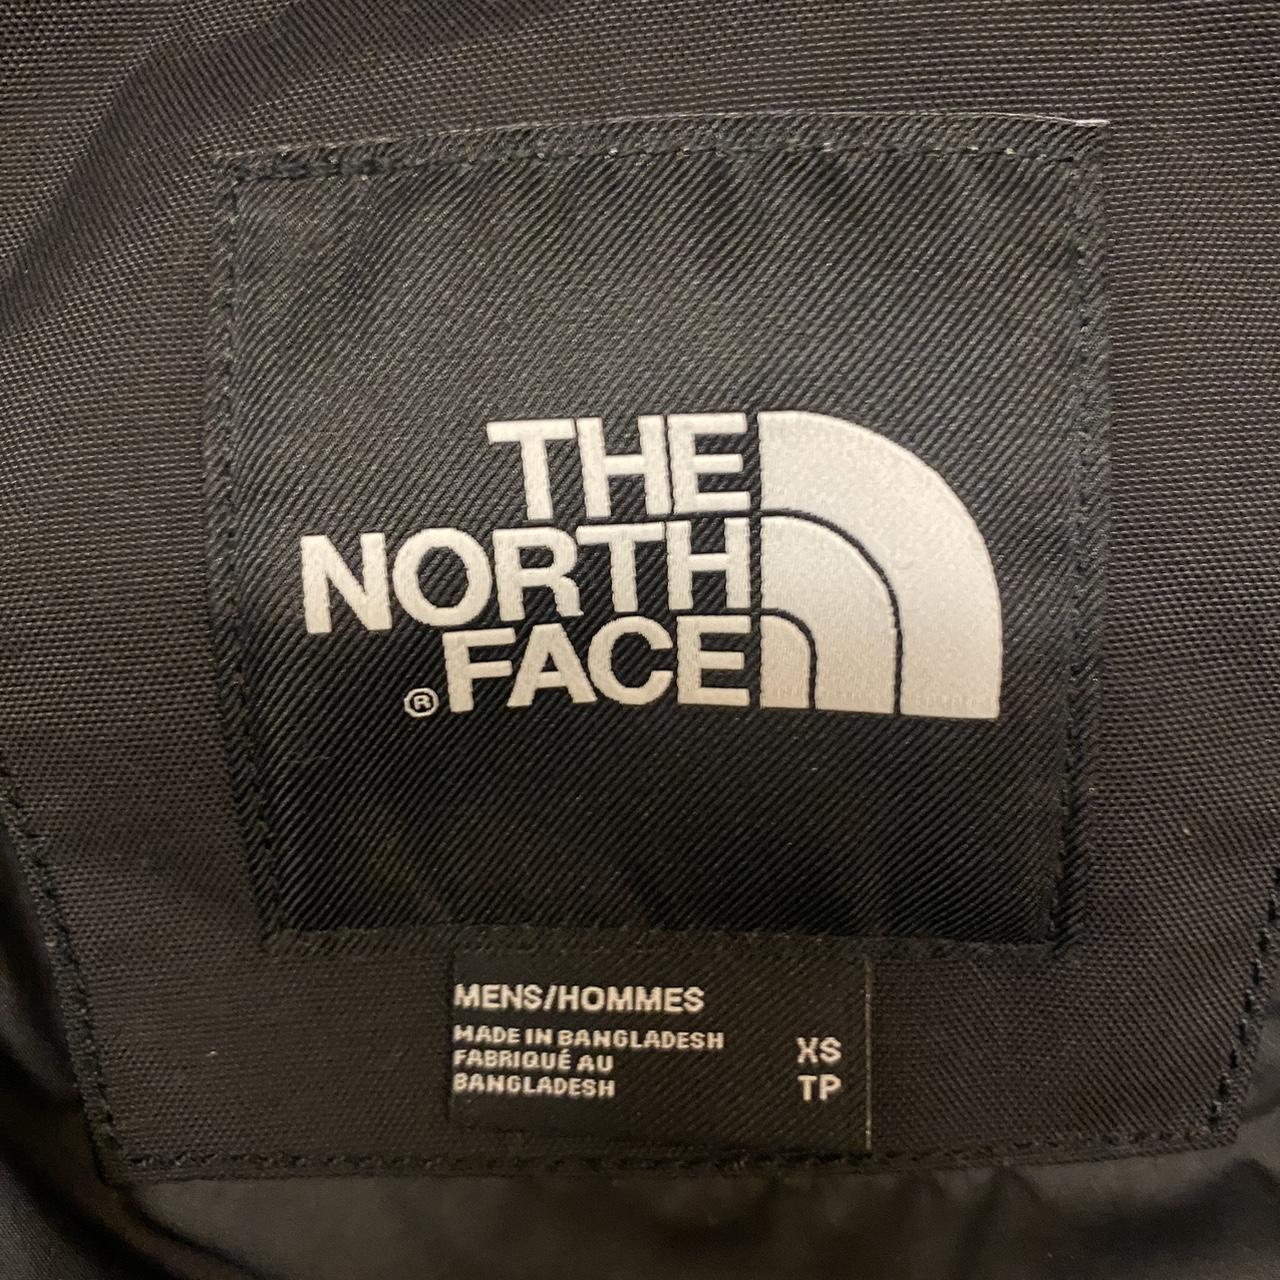 The North Face McMurdo 2 Parka for sale in black and... - Depop